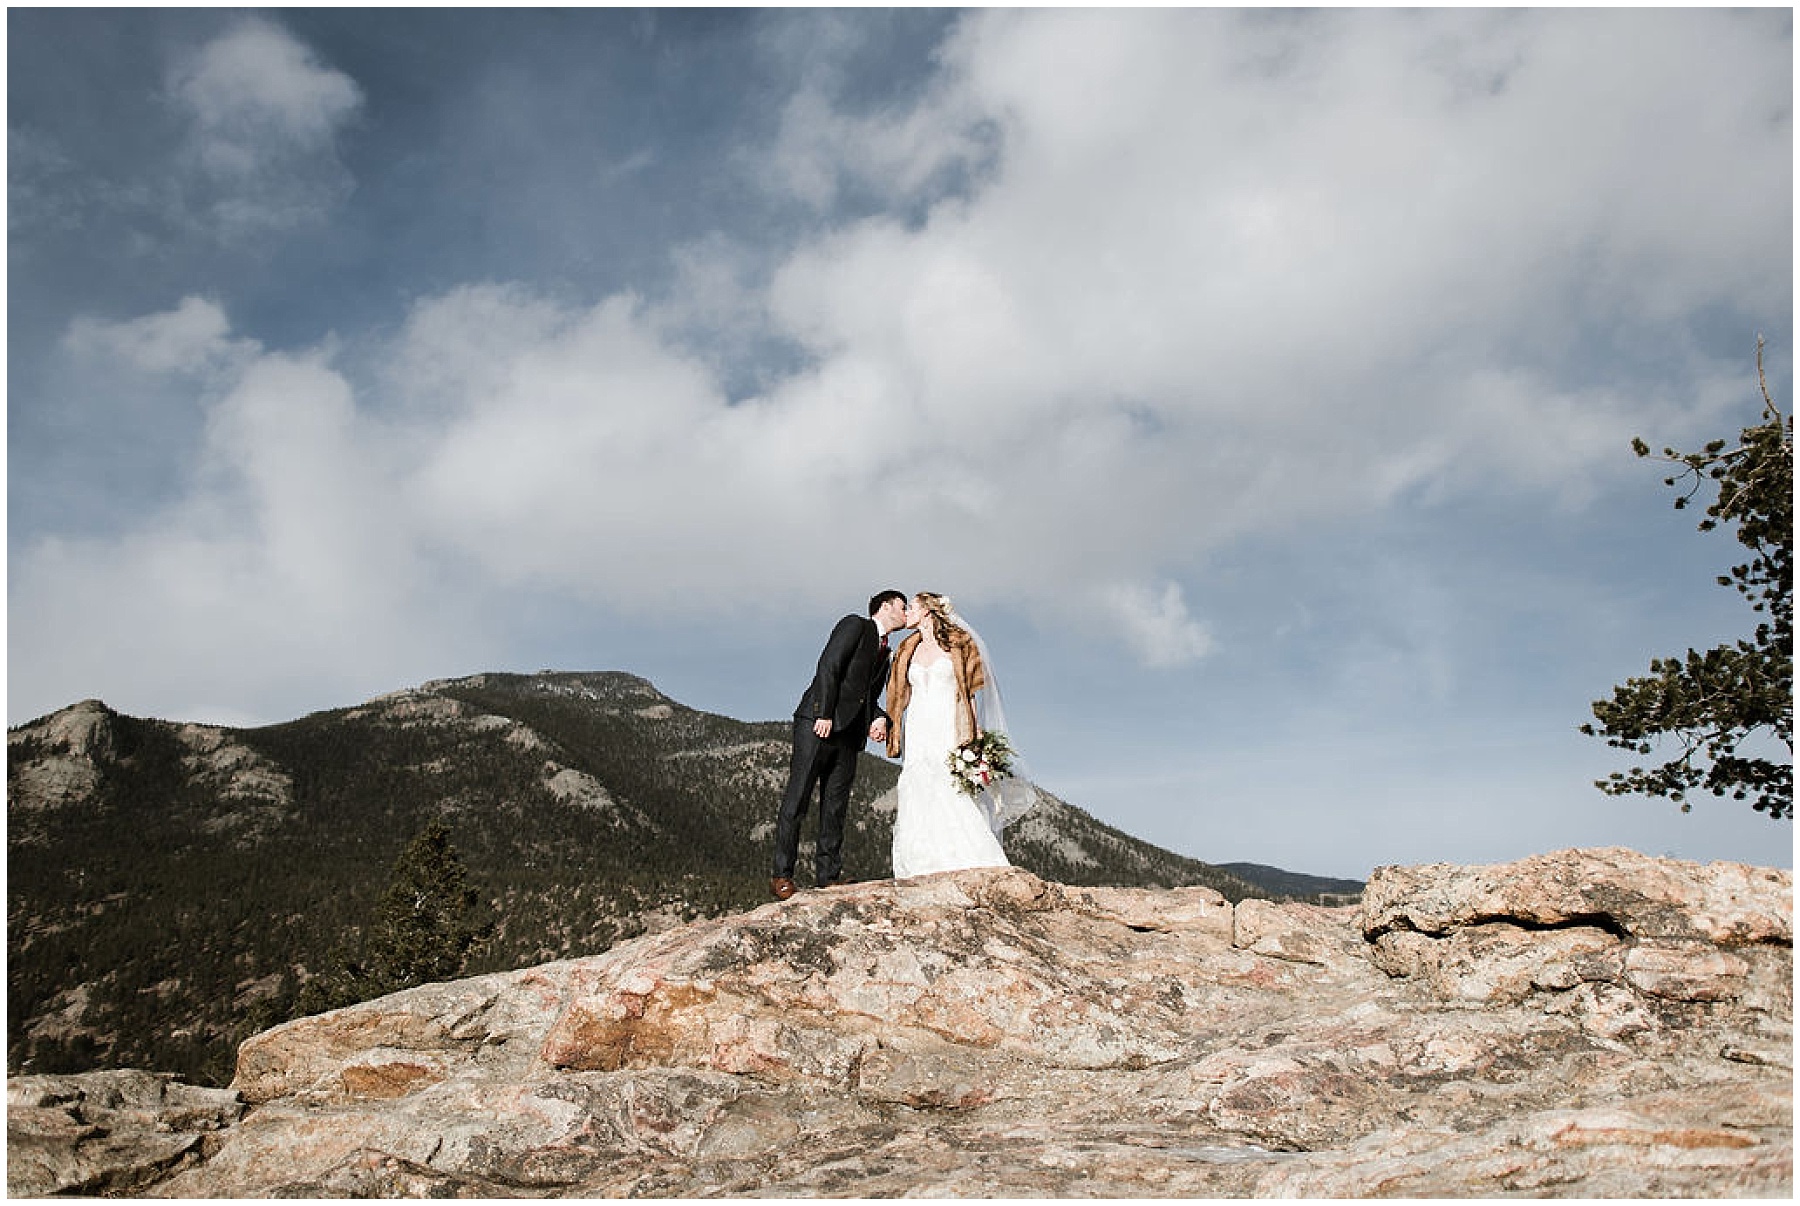 Katesalleyphotography-226_Haley and Dan get married in Estes Park.jpg